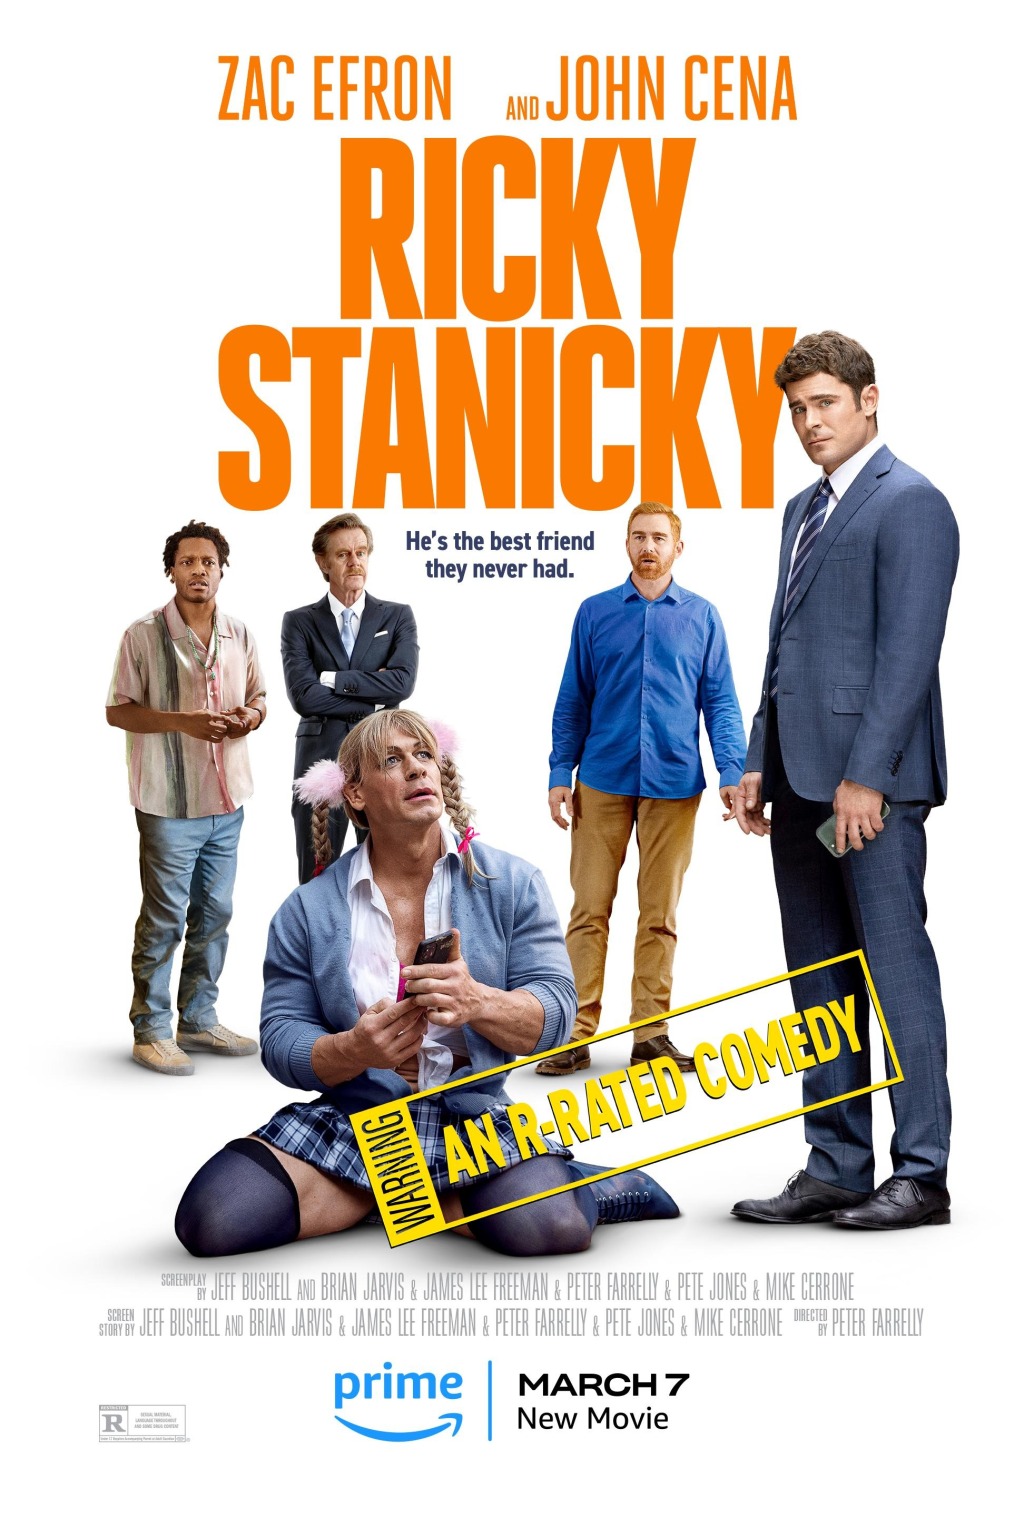 Ricky Stanicky Review — It’s absurdly dumb… but delivers on laughs